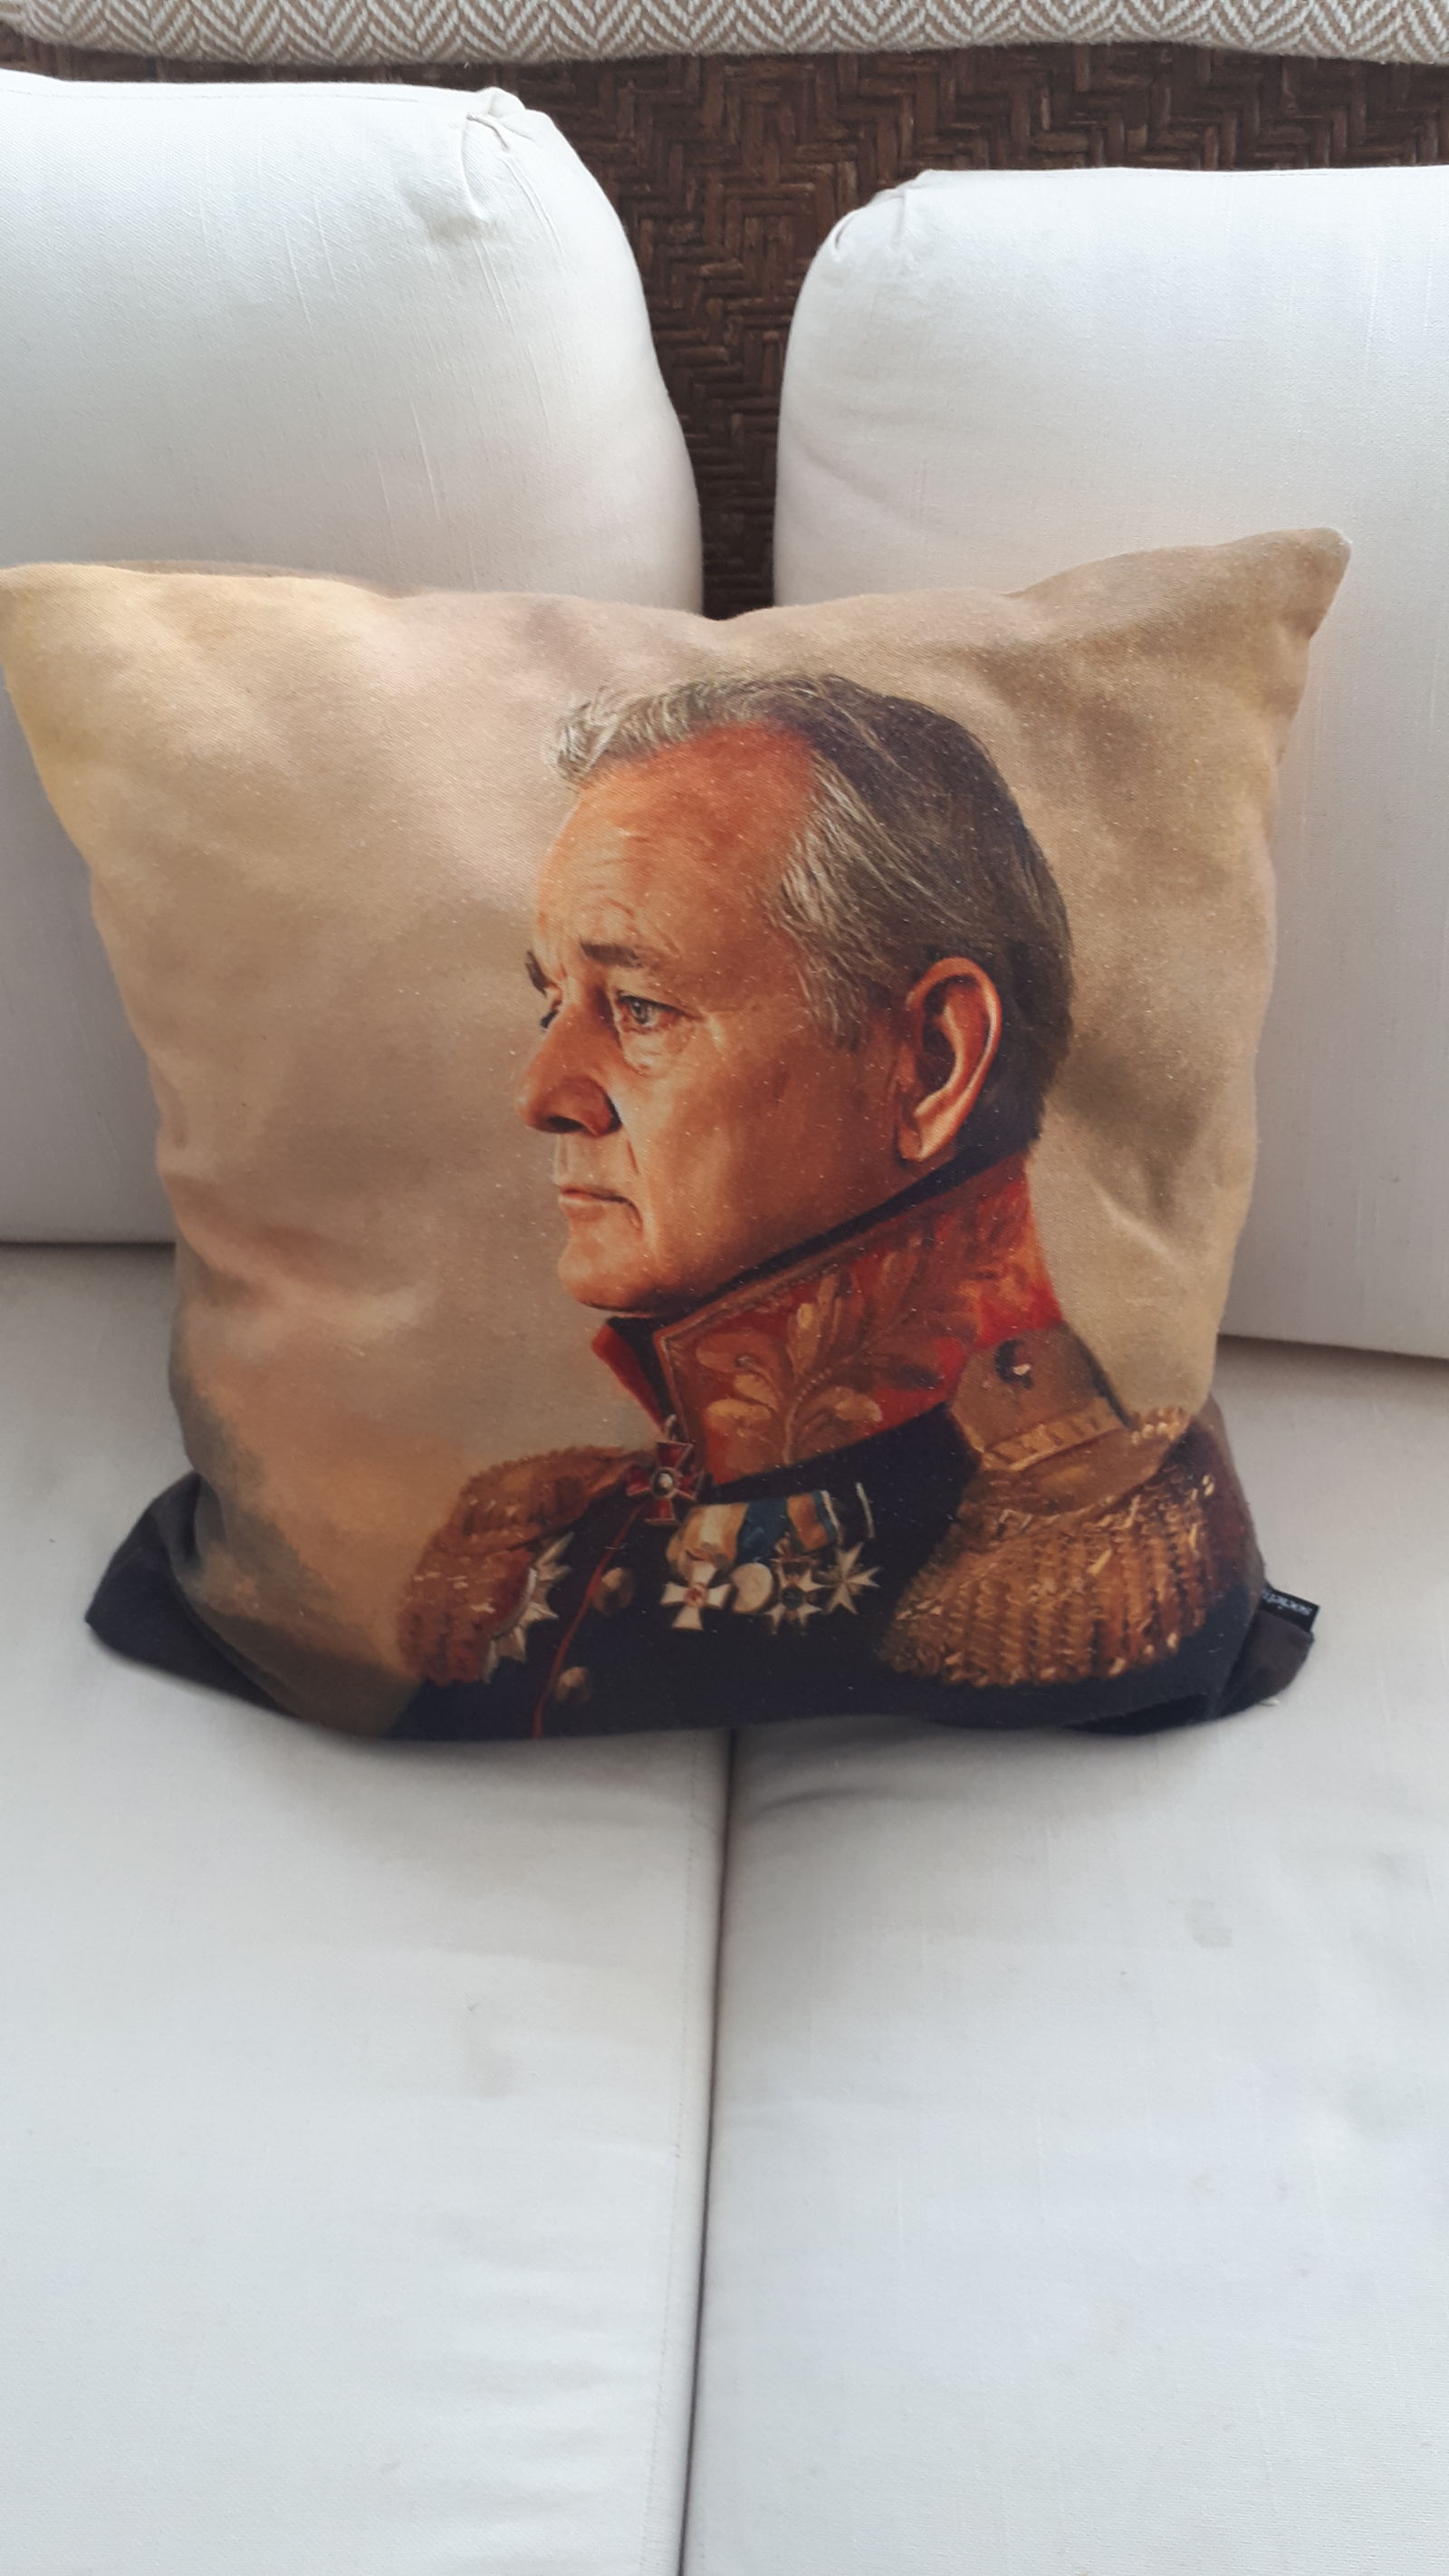 Illustration for article titled My hotel room has a Bill Murray pillow.